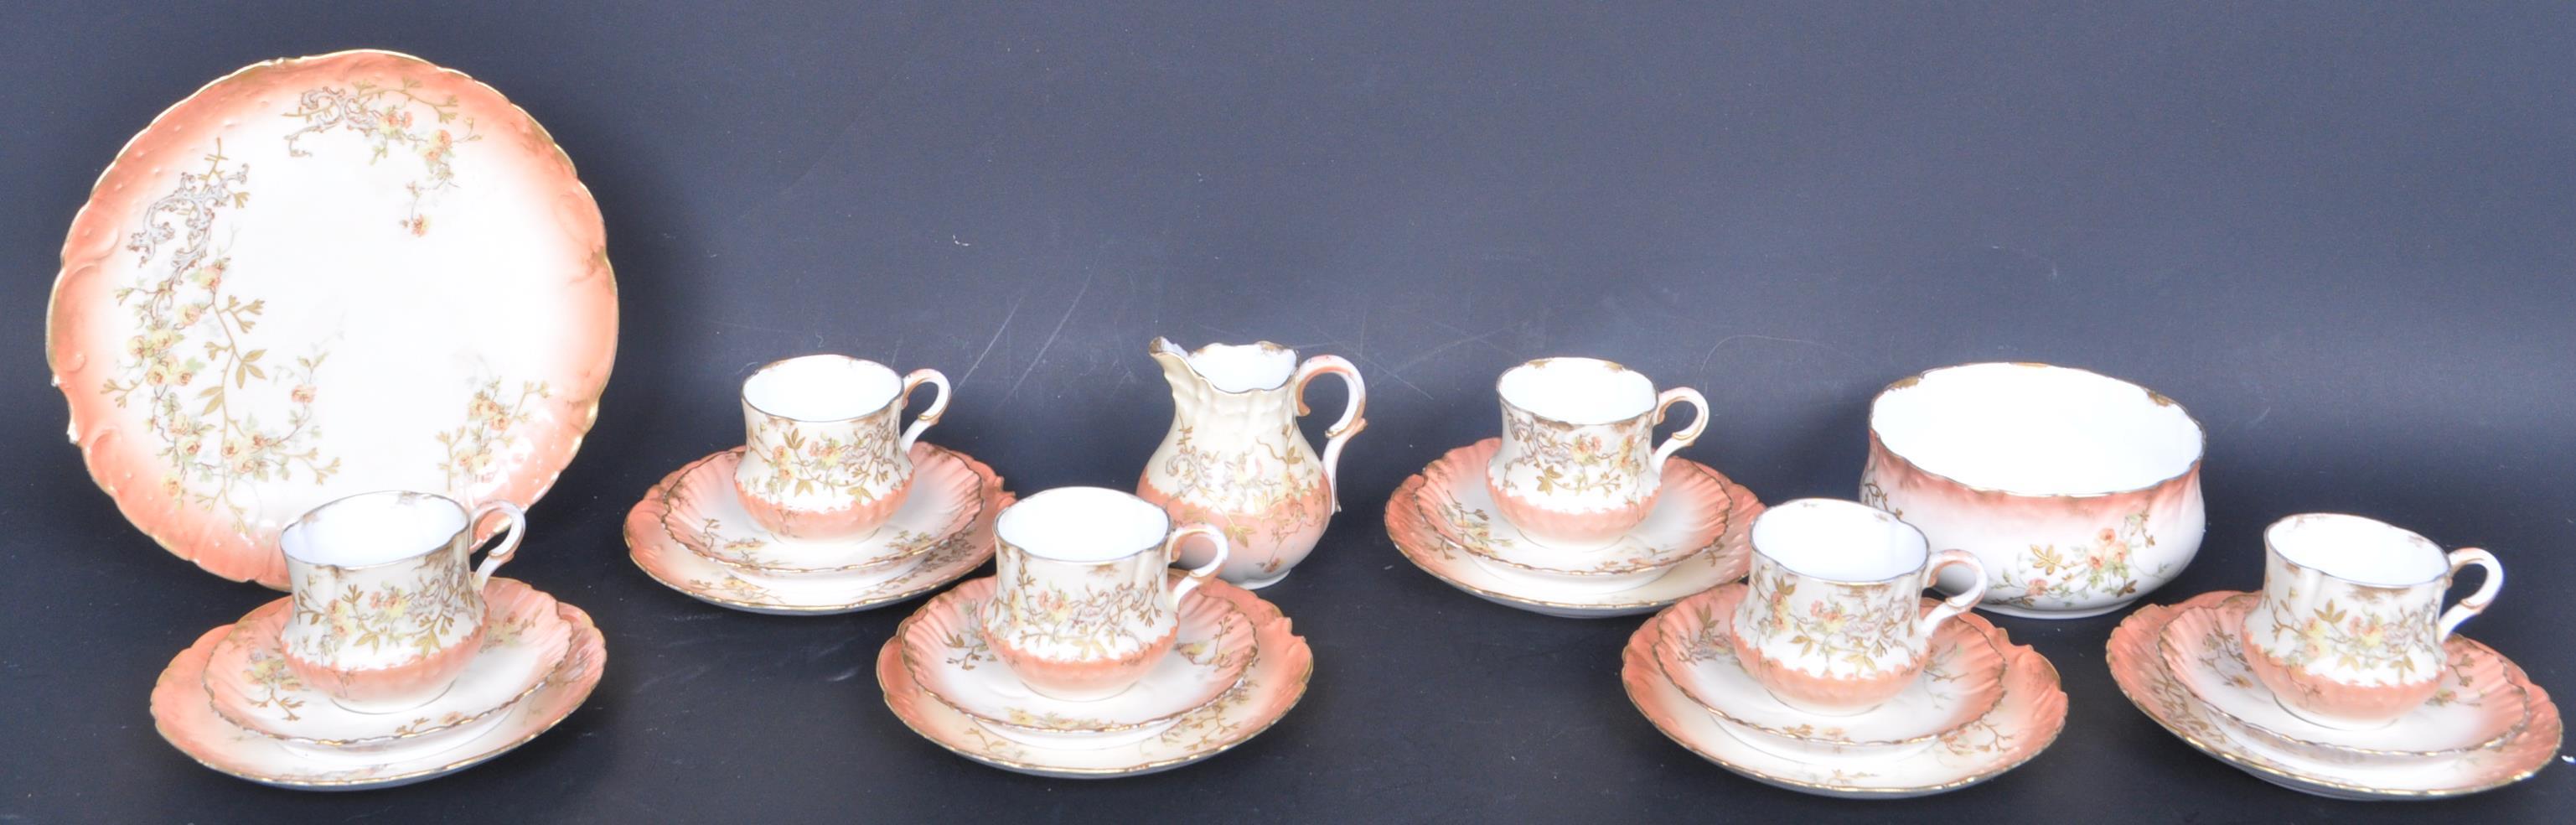 EARLY 20TH CENTURY LIMOGES TEA SERVICE